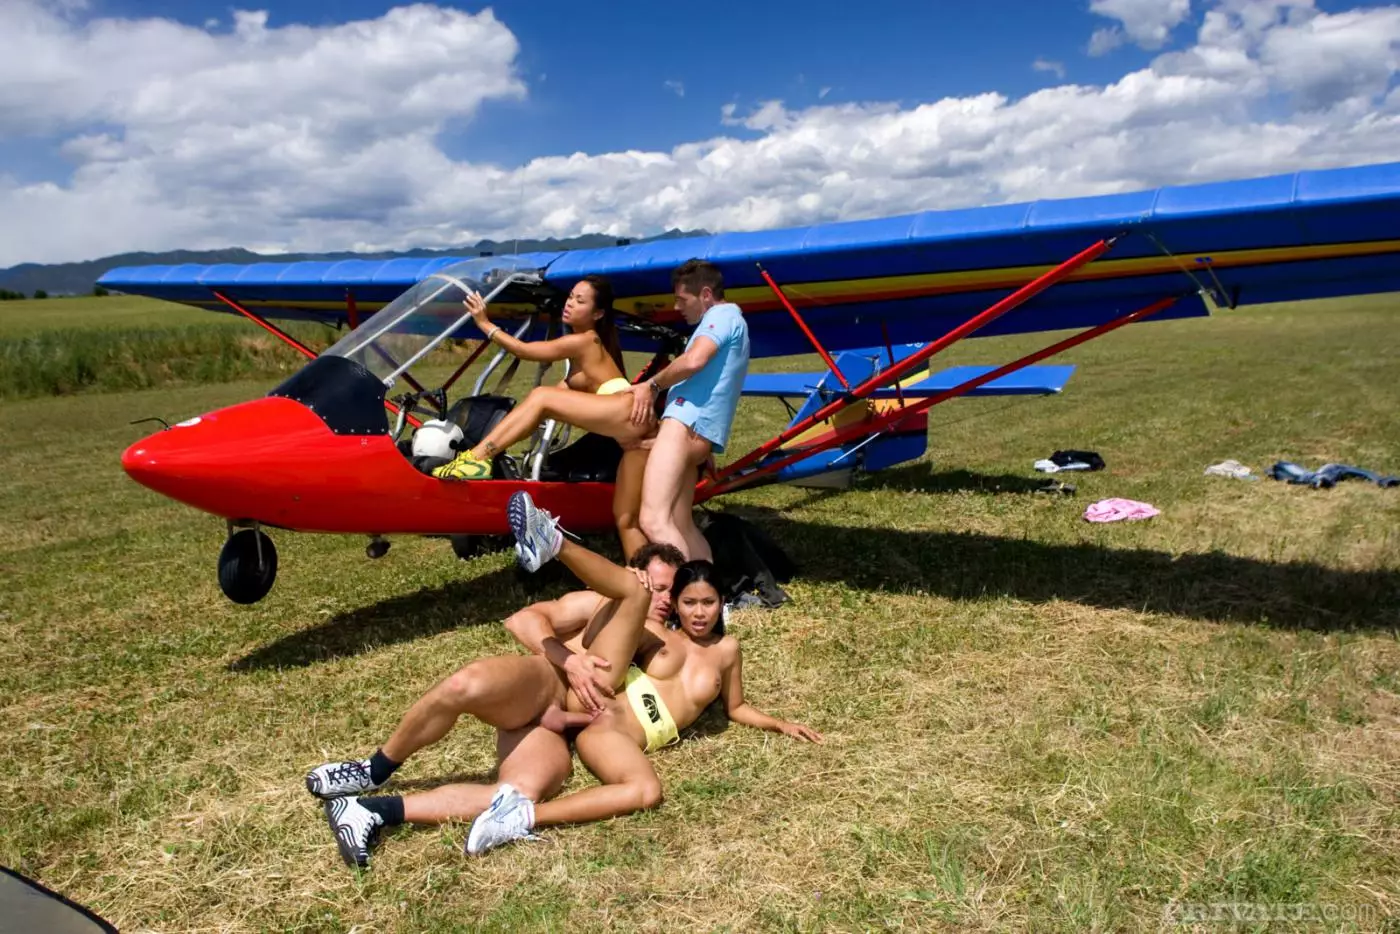 Asian girls Priva and Jade Sin get fucked by two guys in the field beside the plane